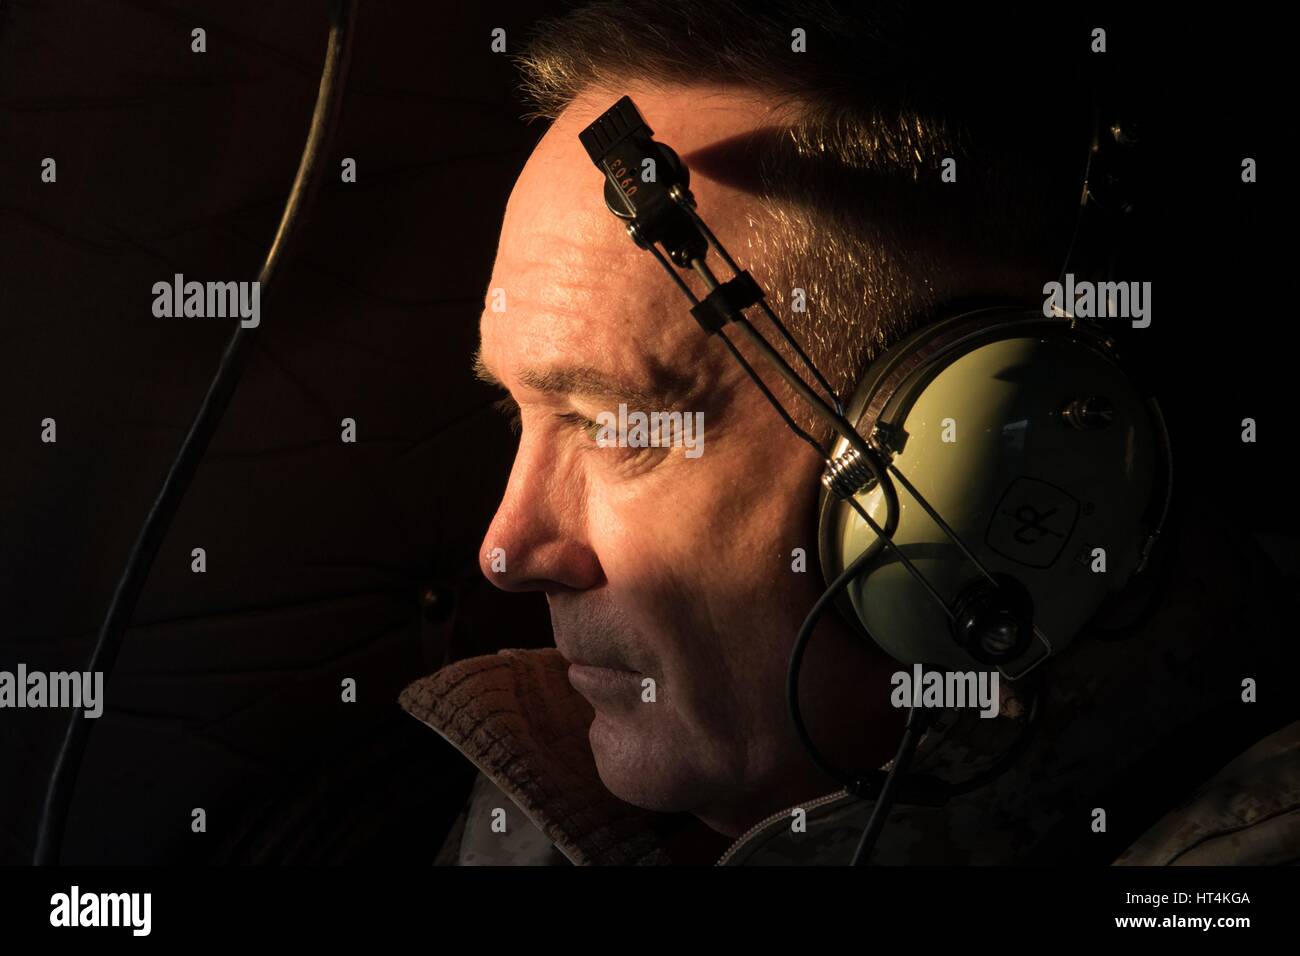 U.S. Joint Chiefs of Staff Chairman Joseph Dunford looks out of the window of a Sikorsky UH-60 Blackhawk helicopter after departing a meeting with the Turkish Chief of General Staff Hulusi Akar February 17, 2017 in Turkey. Stock Photo